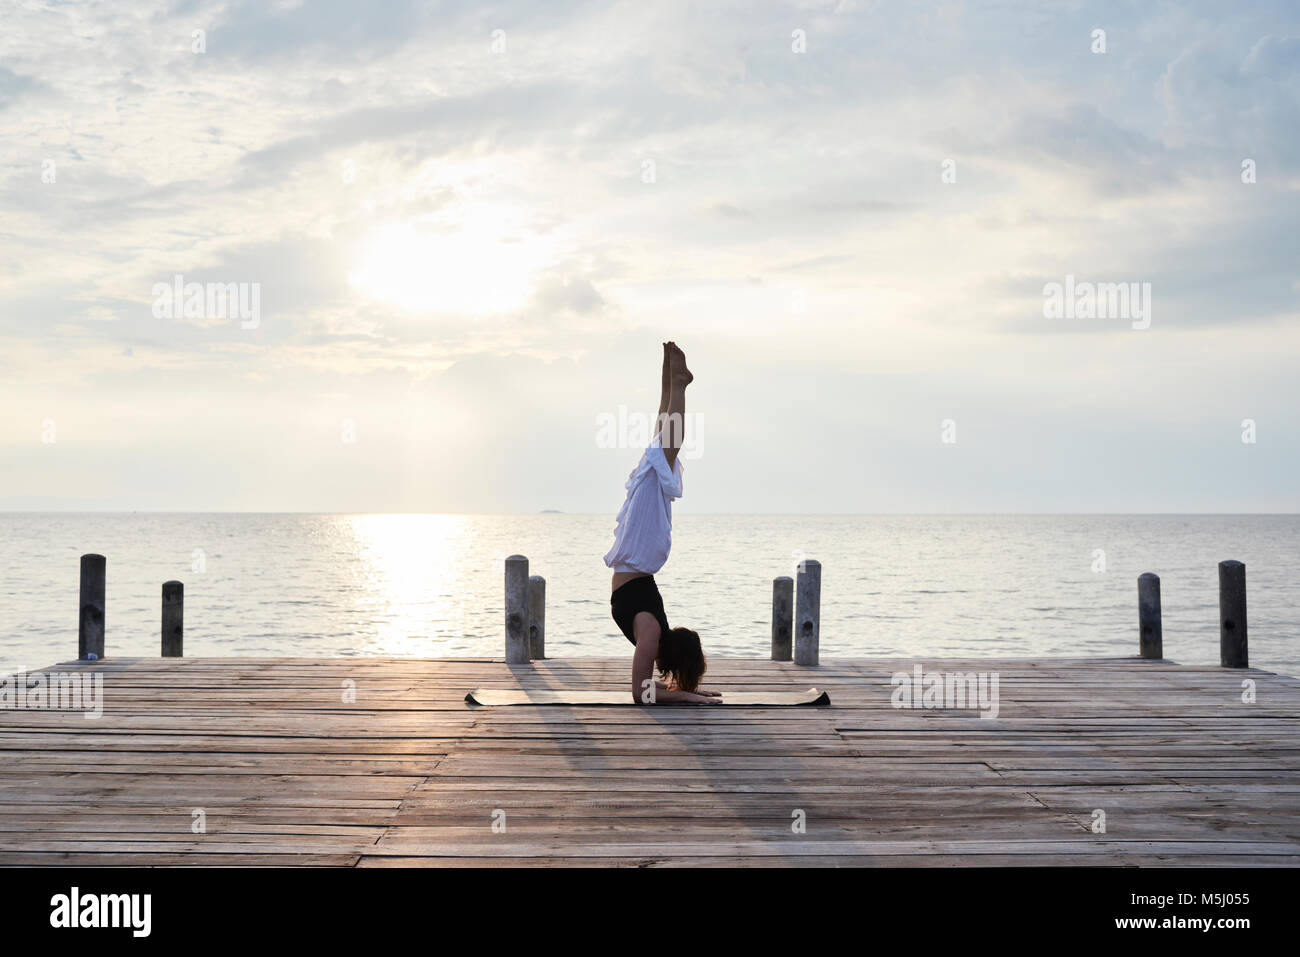 Yoga instructor in Pincha mayurasana position (elbows handstand) in a wooden bridge against sunset and sea. Kep, Cambodia. Stock Photo